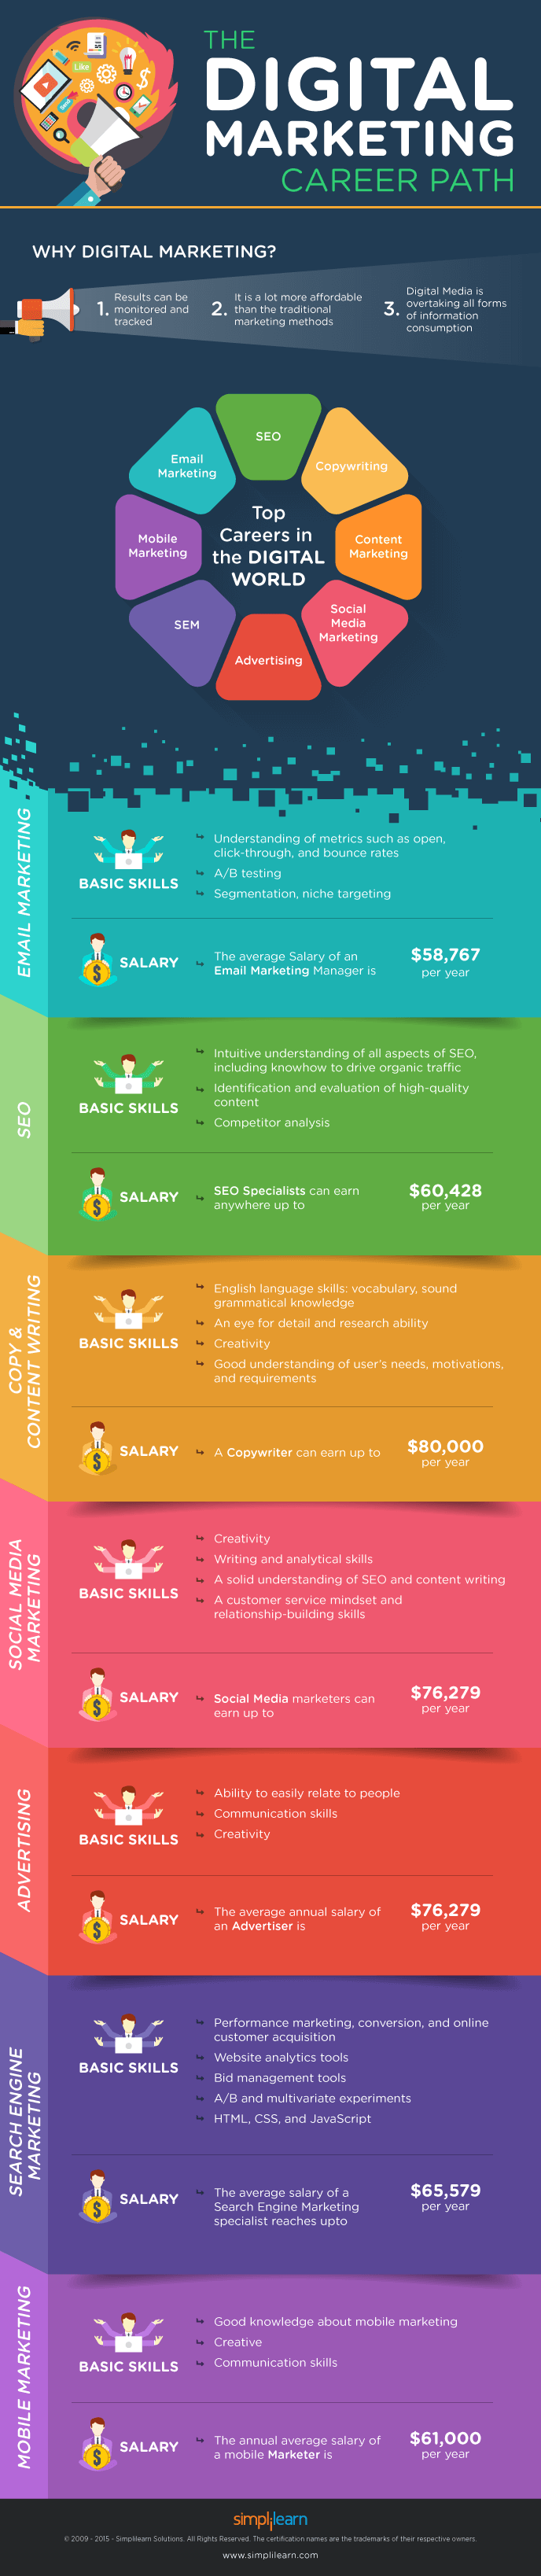 How to launch a Stellar Career in Digital Marketing? - #infographic